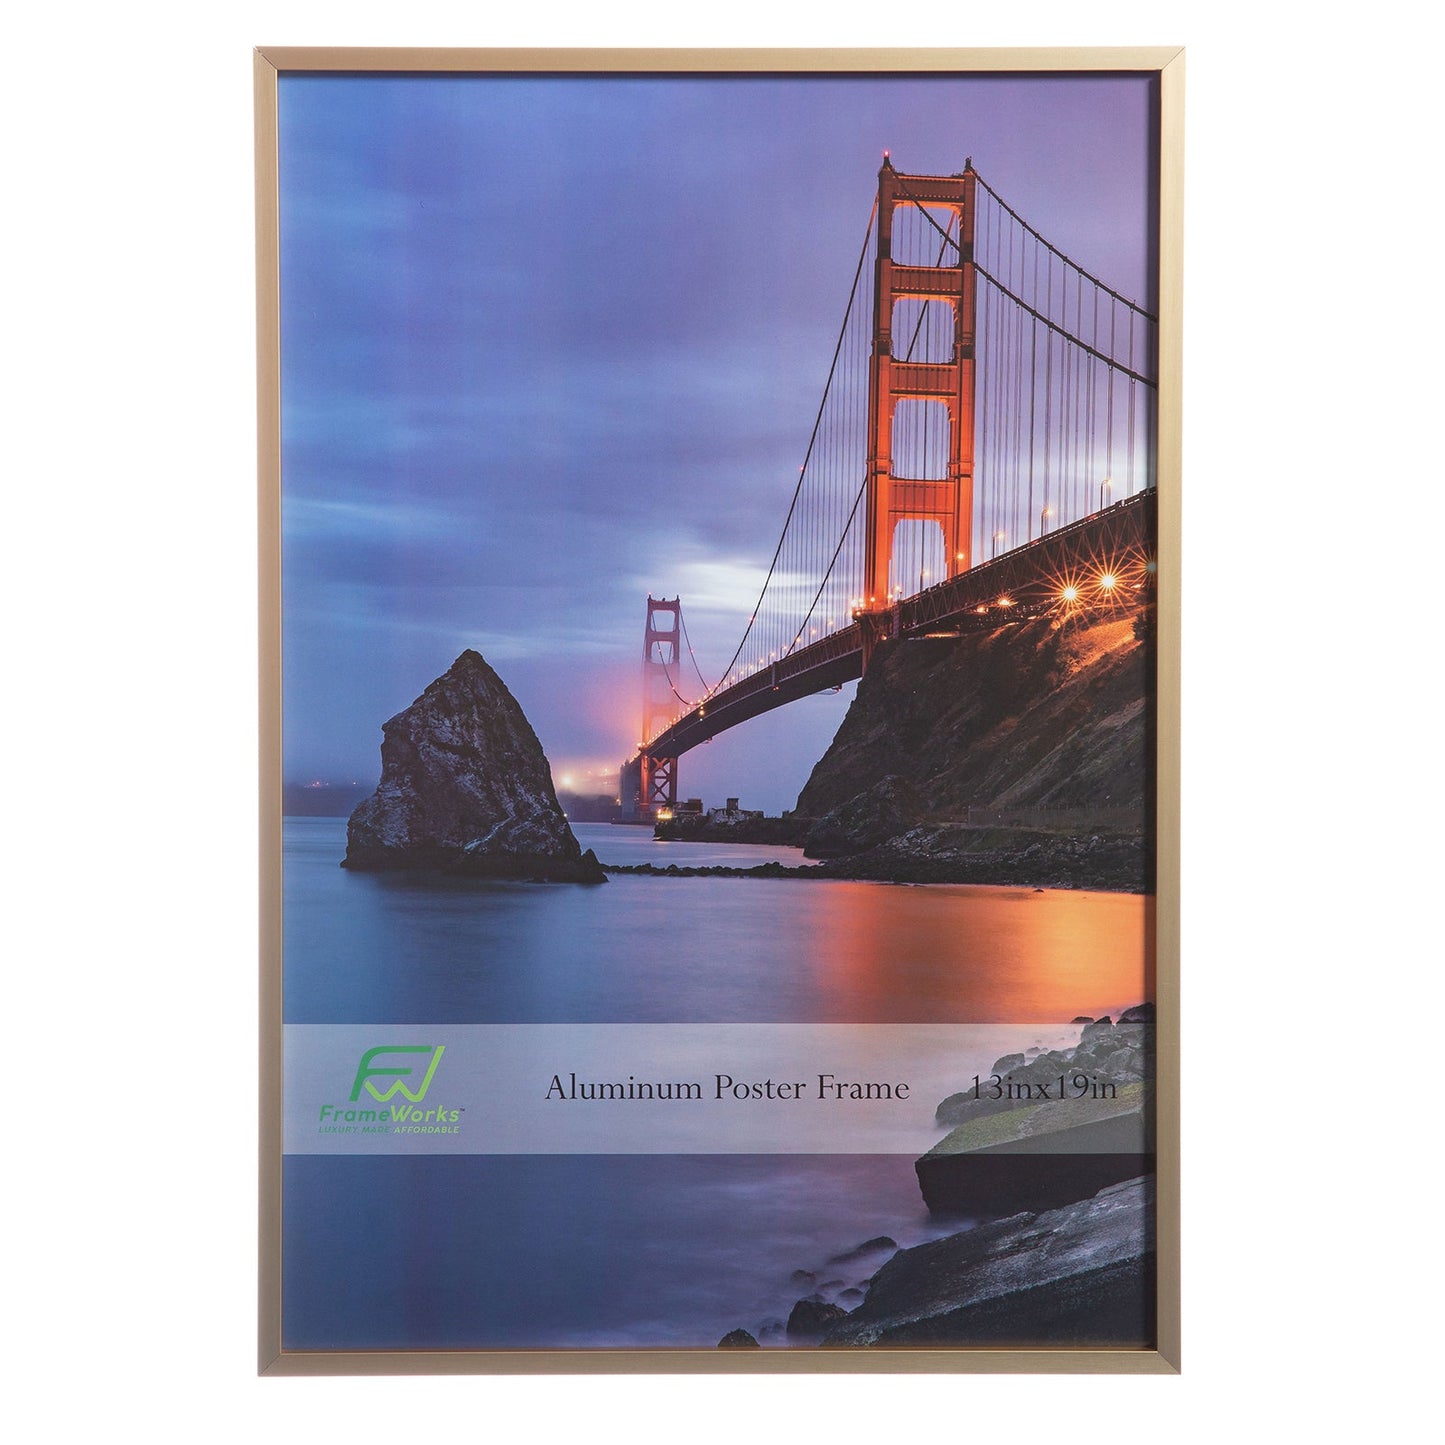 13" x 19" Gold Brushed Aluminum Poster Picture Frame with Plexiglass